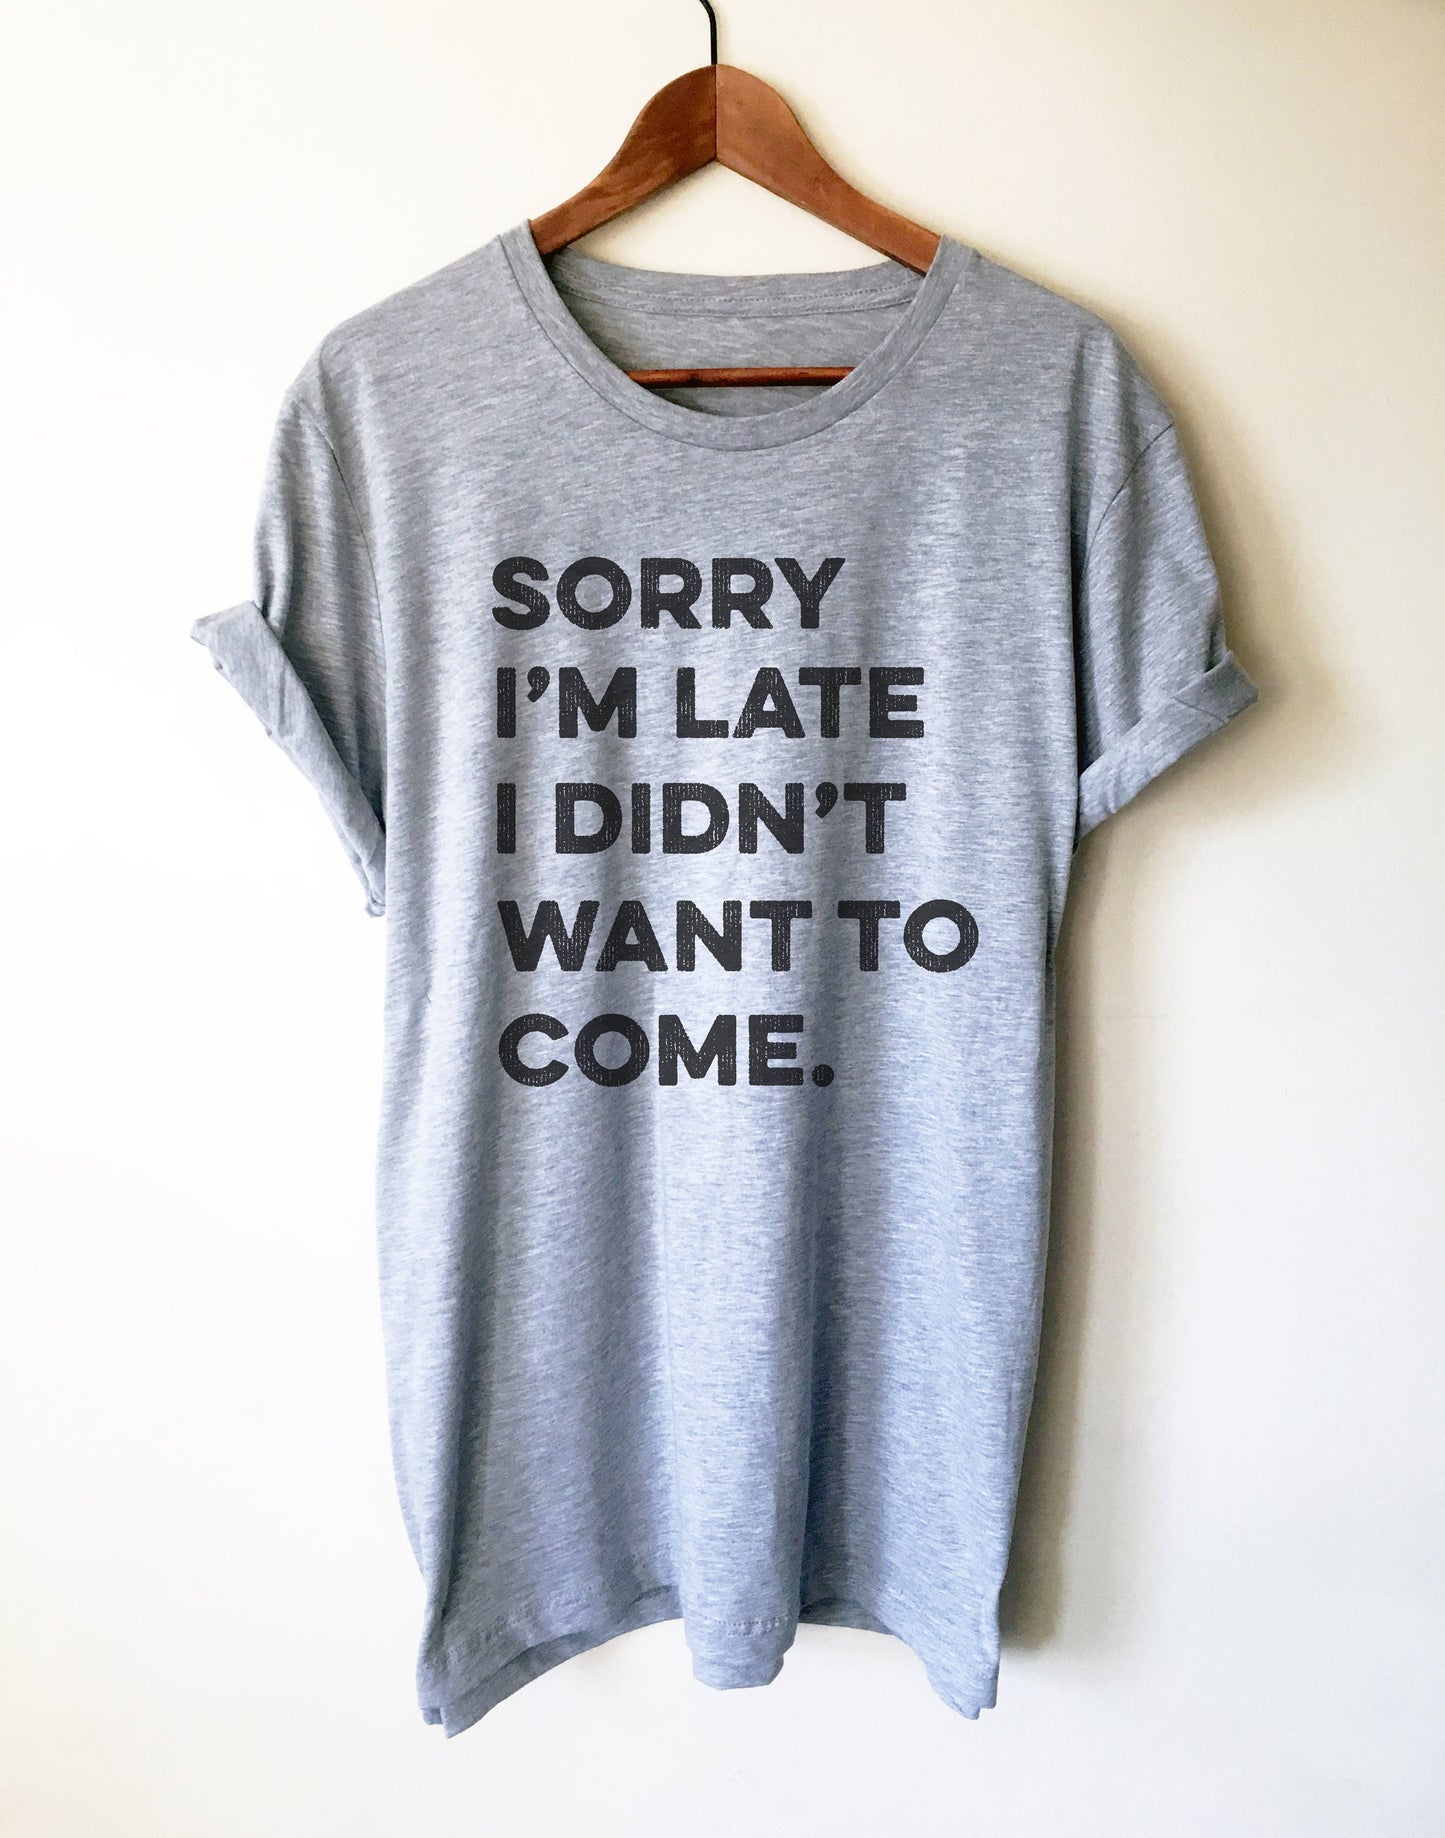 Sorry I'm Late I Didn't Want To Come Unisex Shirt - Introvert shirt, Introvert gift, Introverts unite, Antisocial shirt, Socially awkward